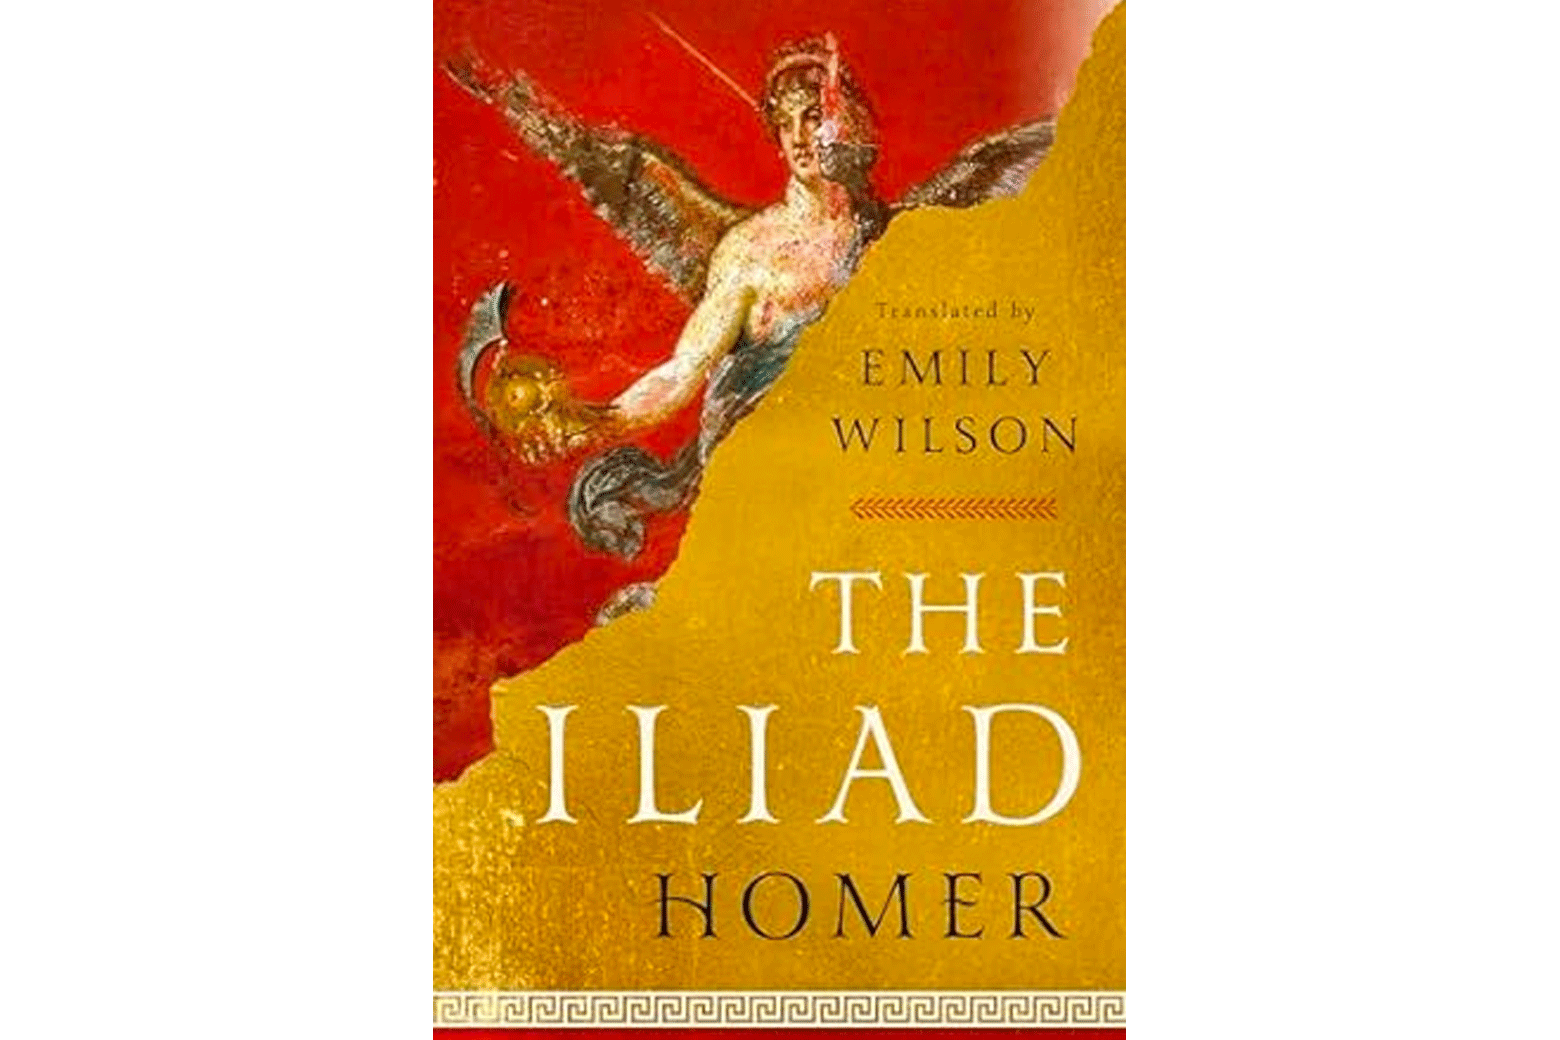 Cover of Emily Wilson's translation of The Iliad.